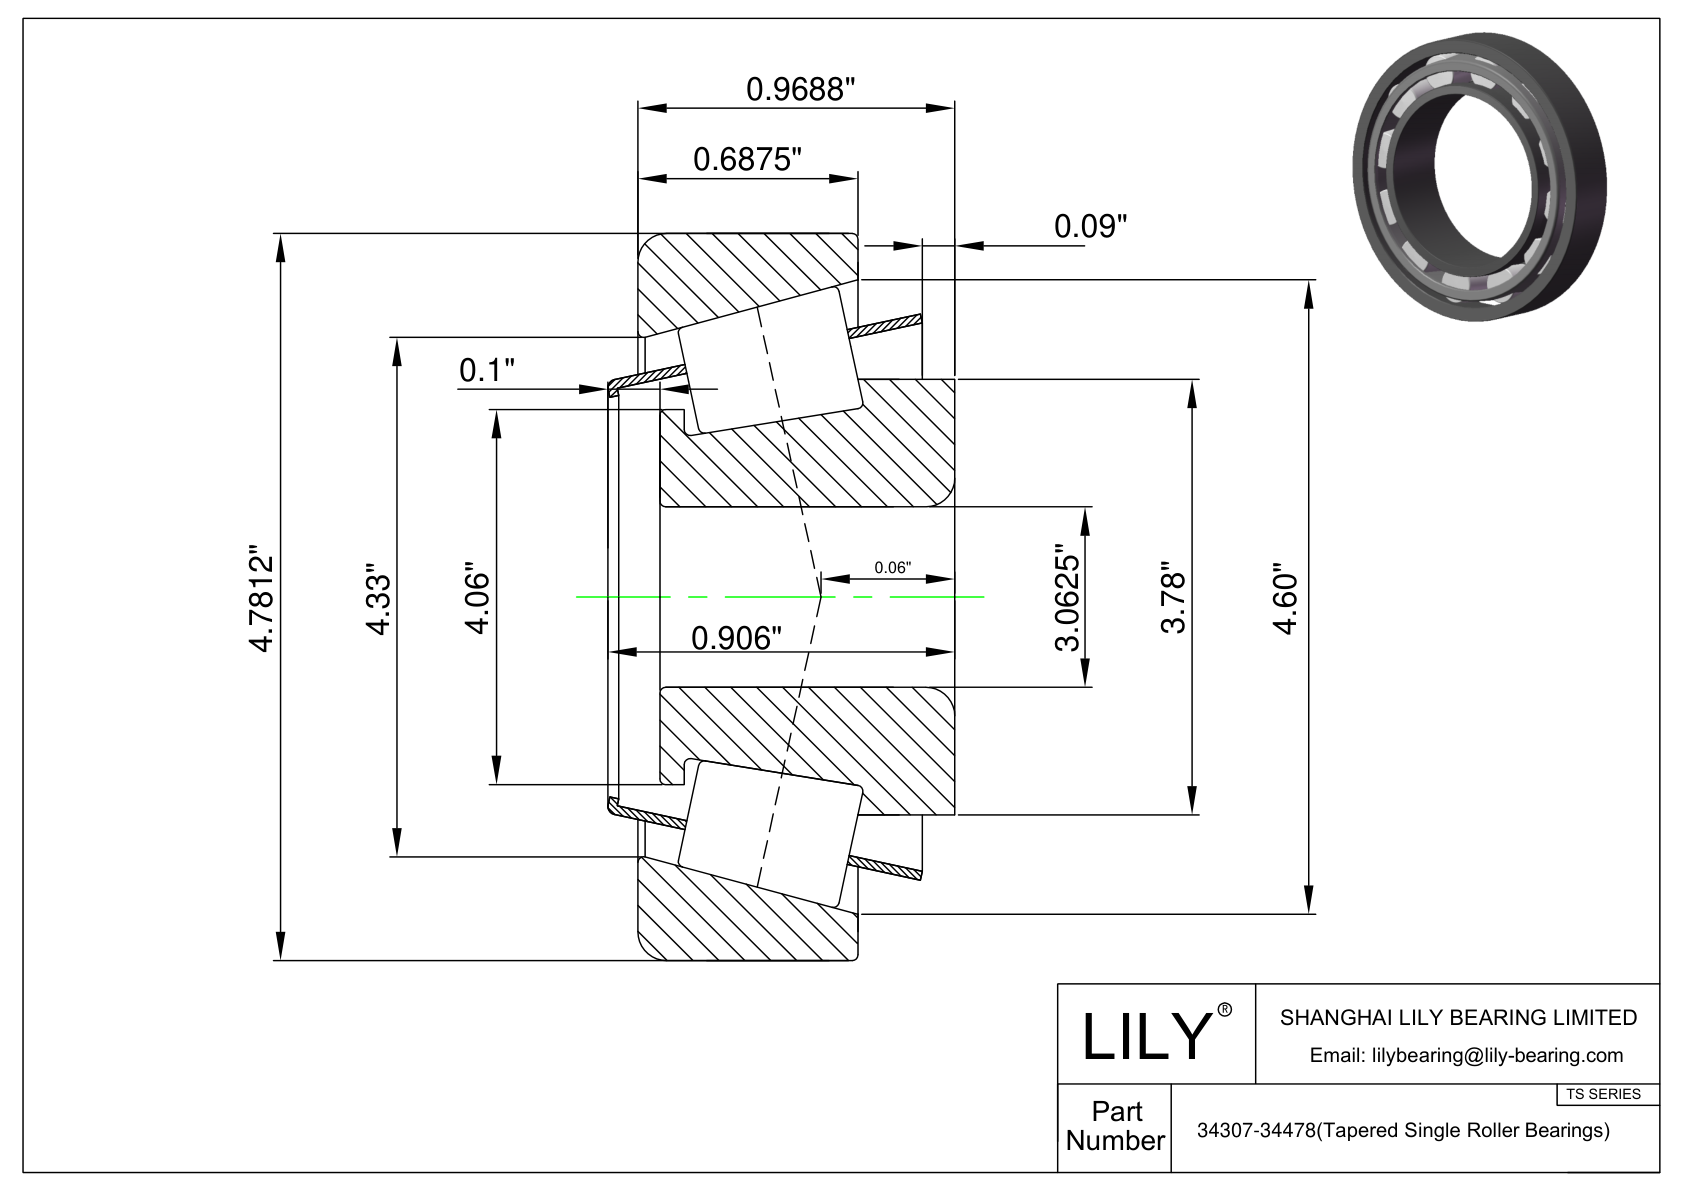 34307-34478 TS (Tapered Single Roller Bearings) (Imperial) cad drawing